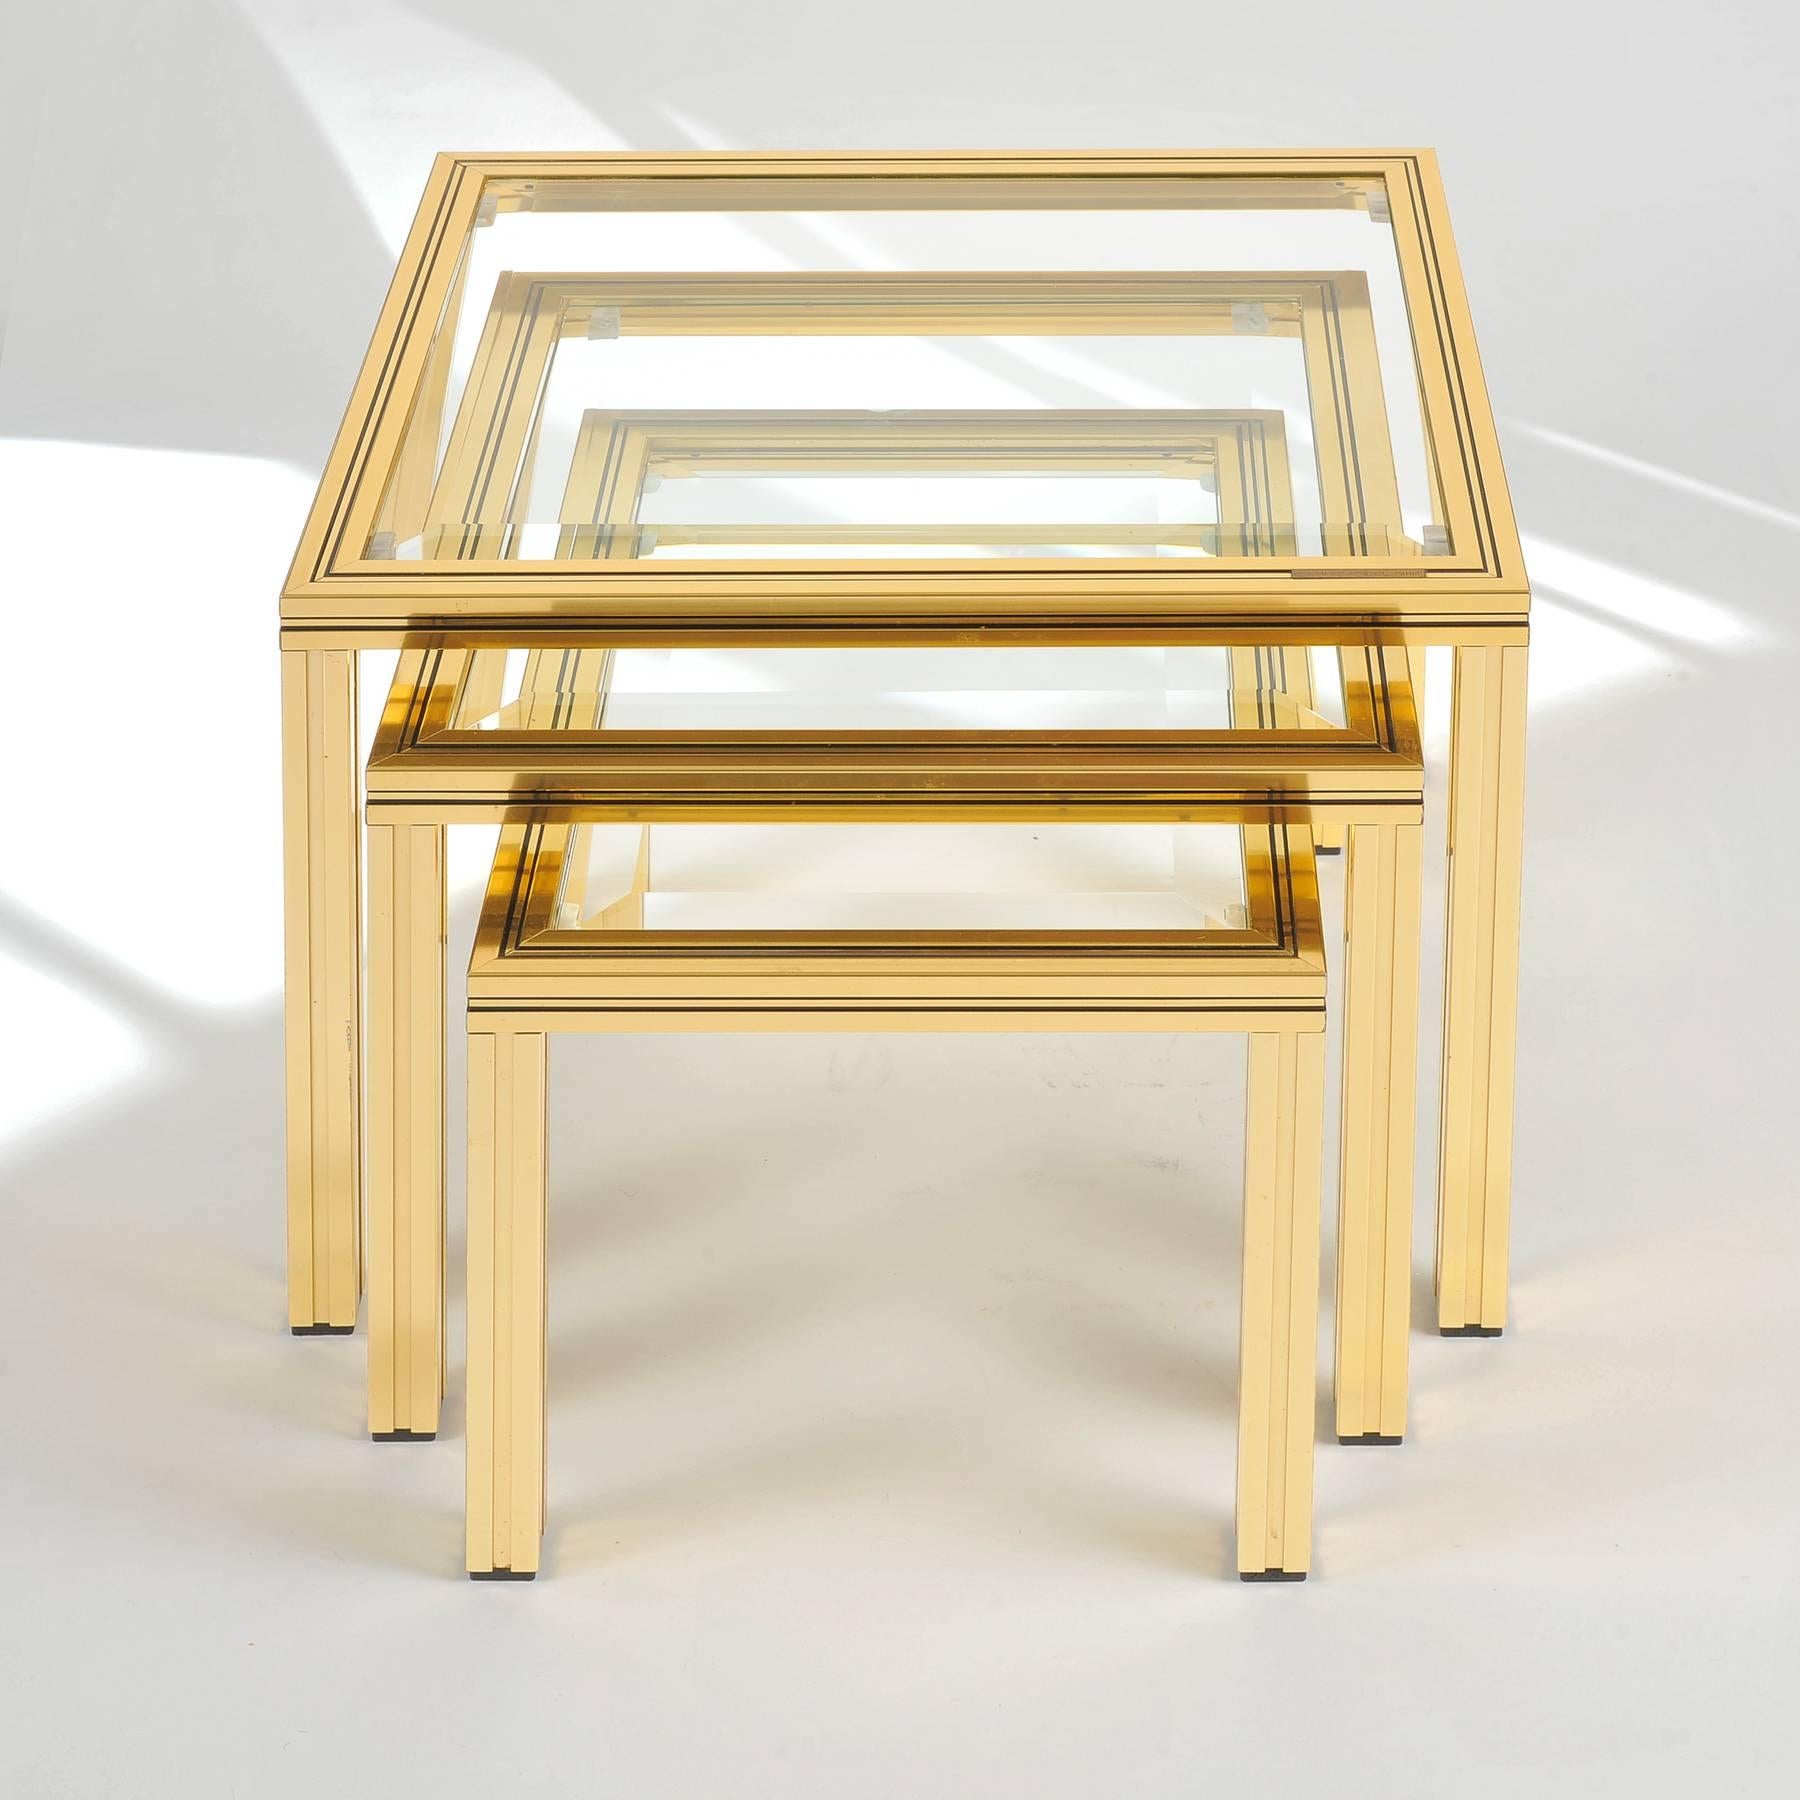 Elegant nest of three tables in brass-plated aluminium (or gilt brass) with beveled glass tops, designed by Pierre Vandel during the 1980s. Signed “PIERRE VANDEL PARIS